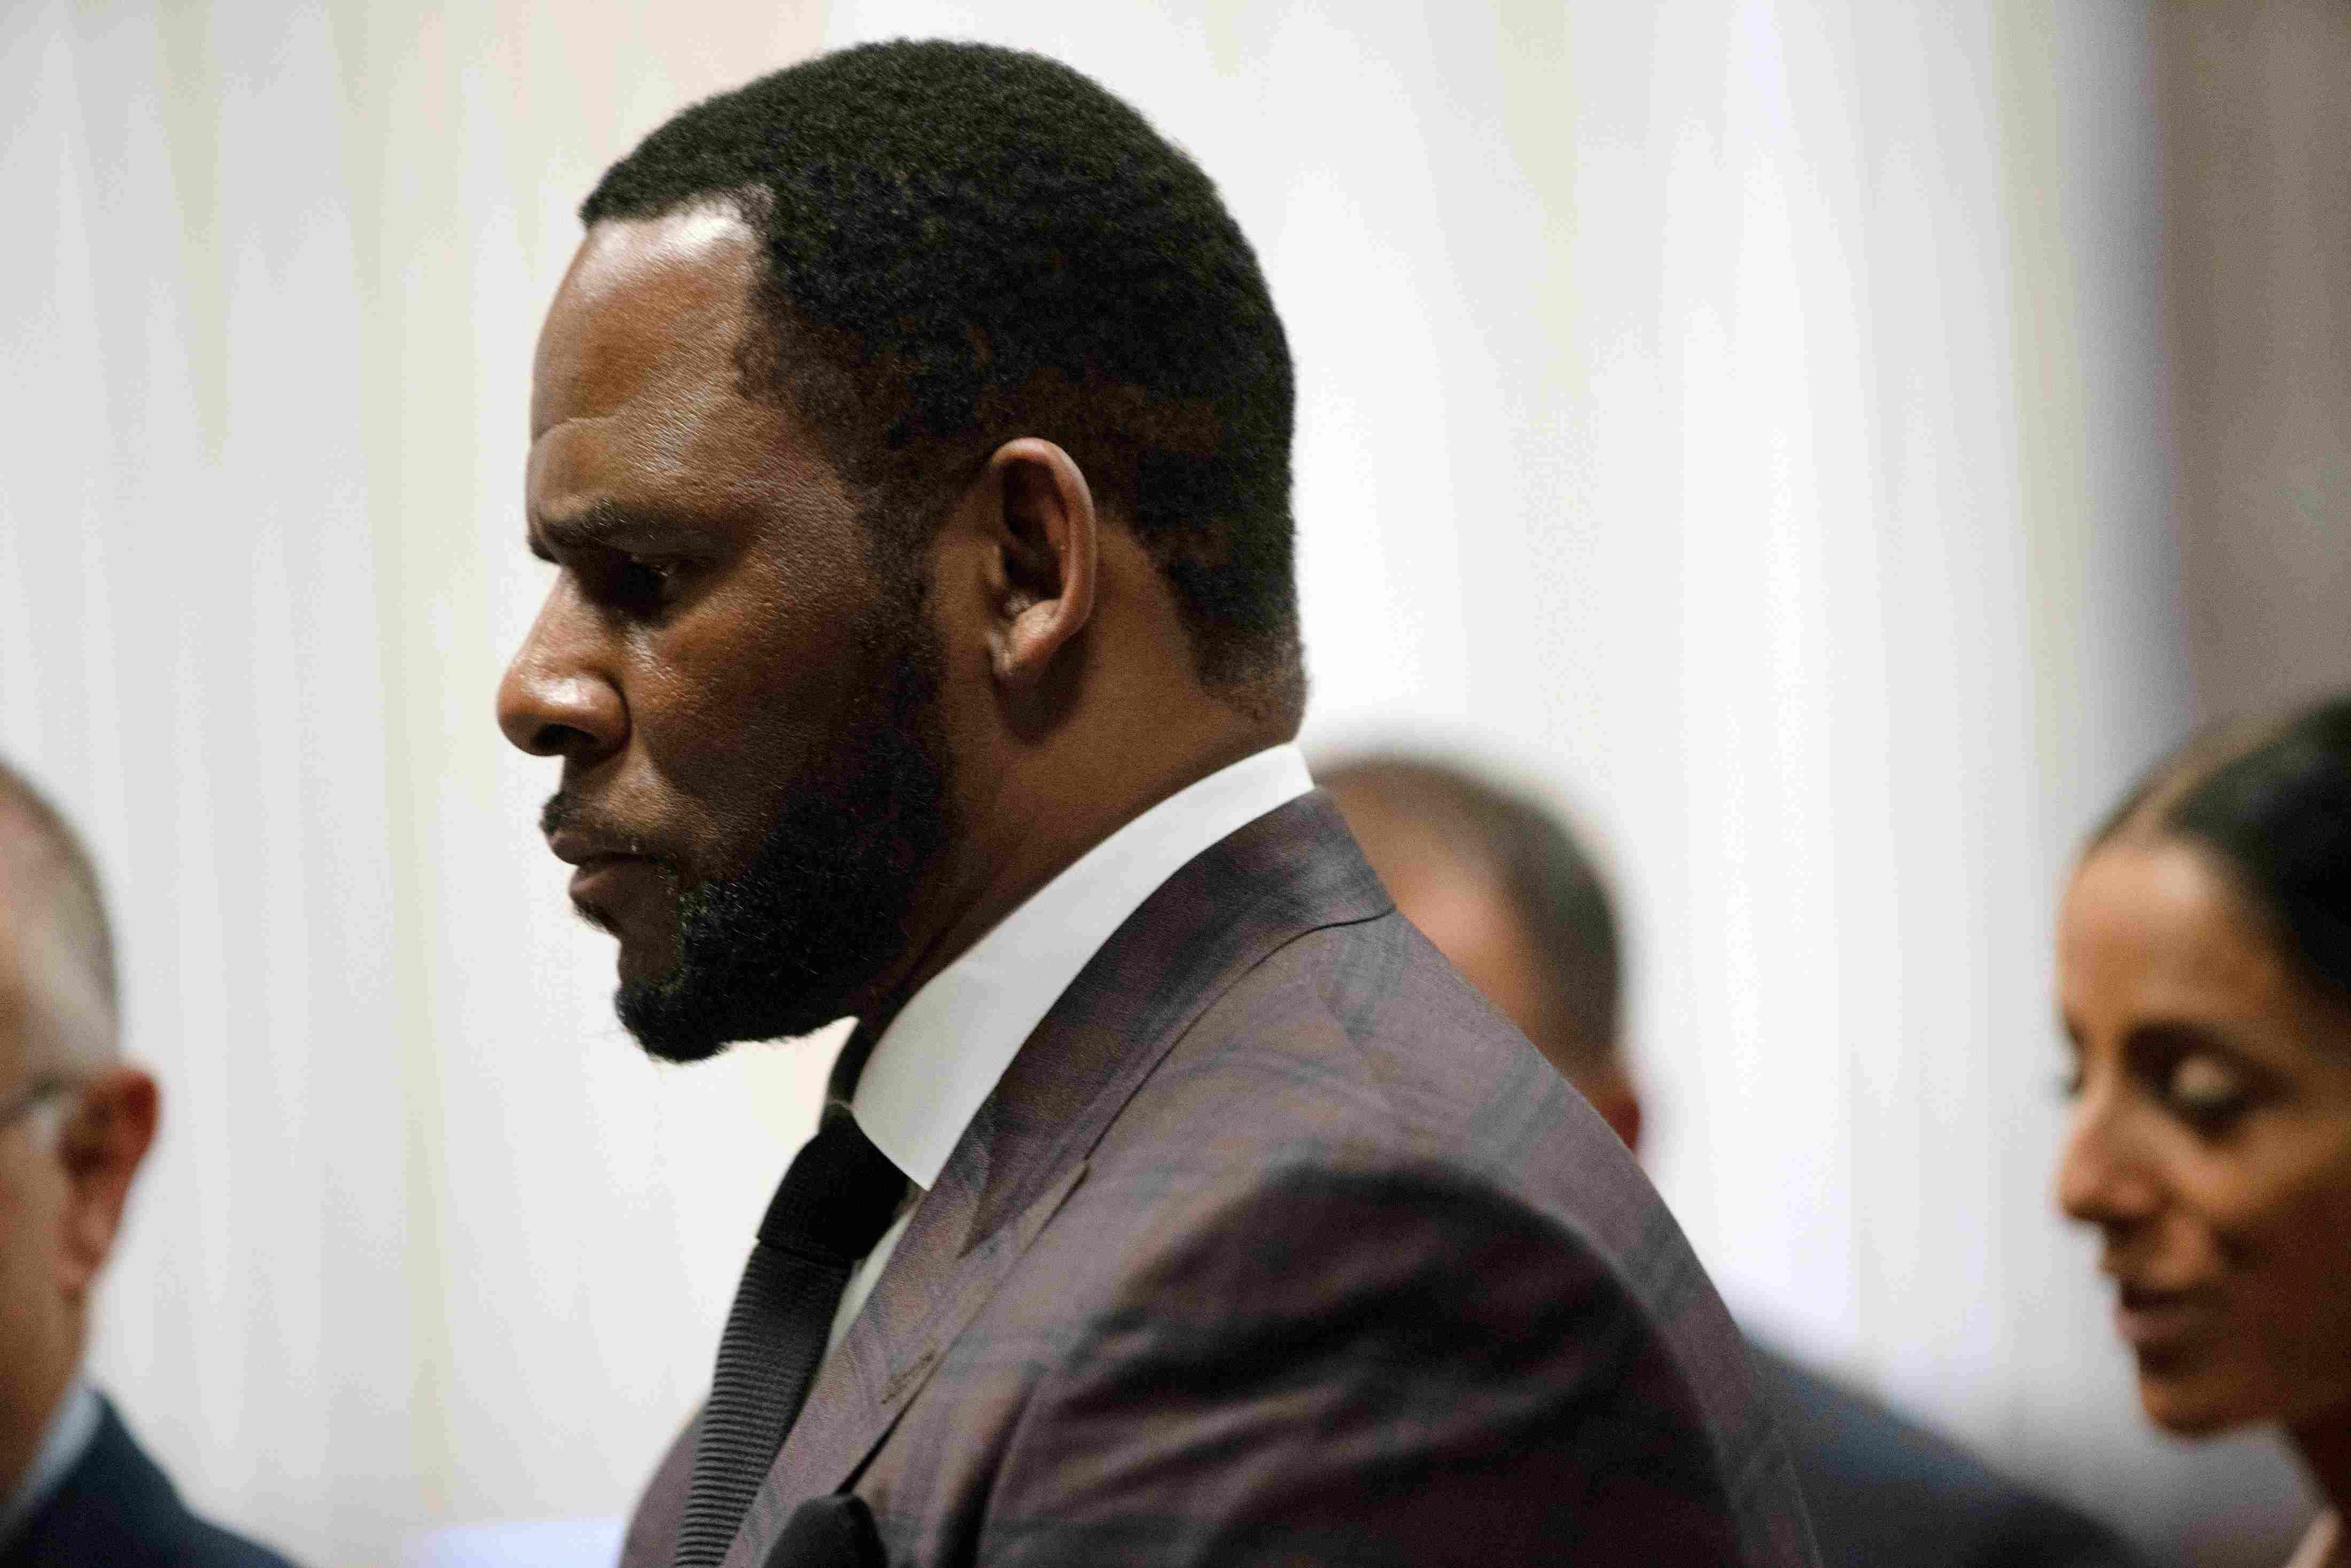 R. Kelly convicted of luring women, underage girls for sex